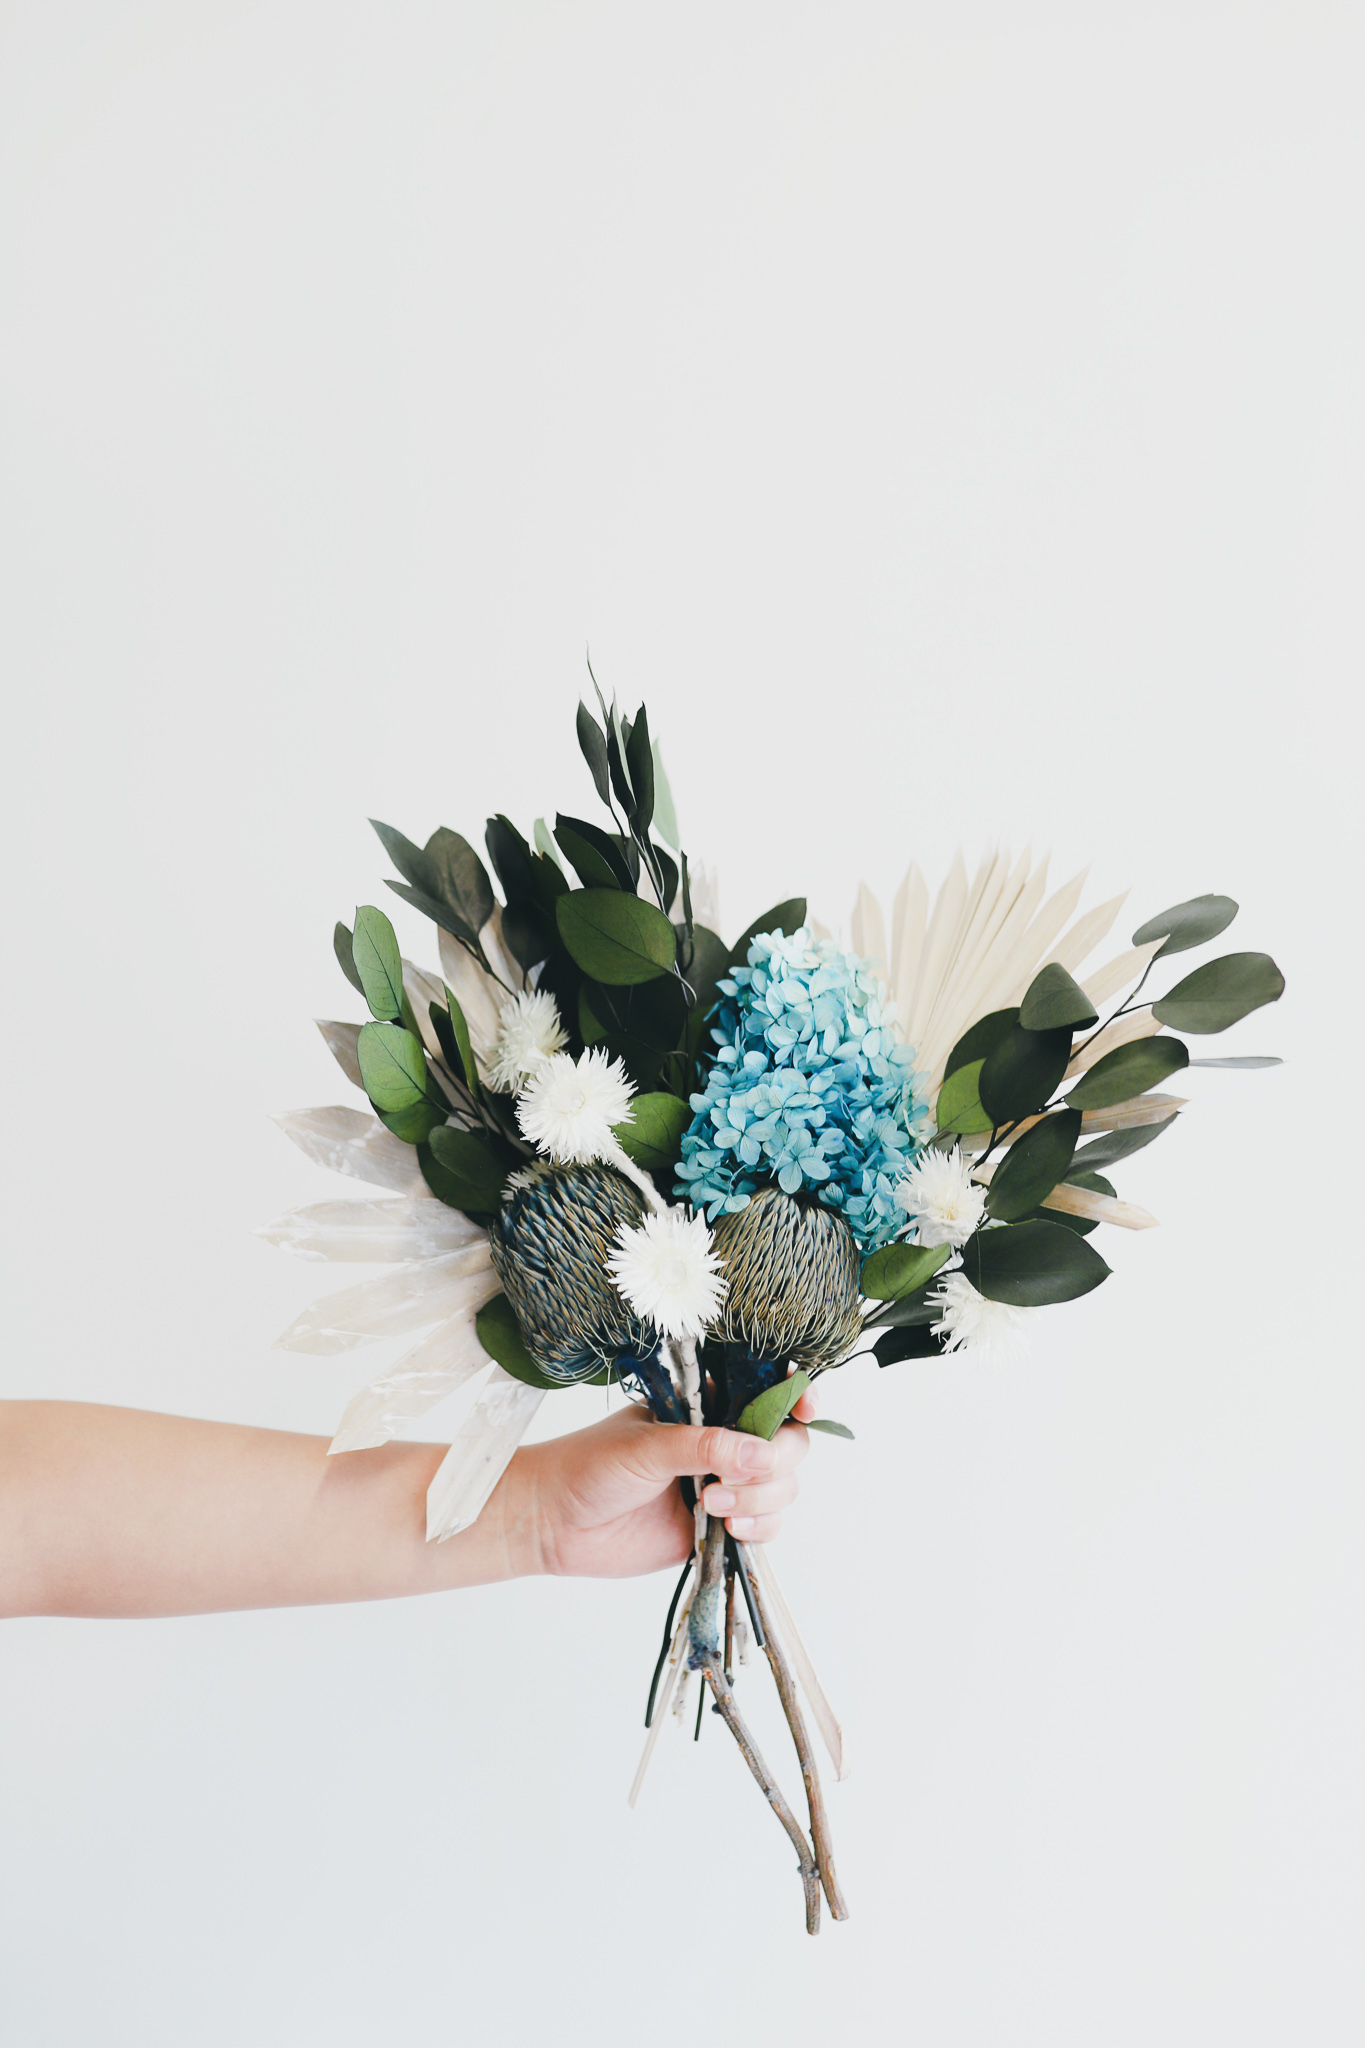 Dried Flower Bundle with Protea, Palms, and Eucalyptus